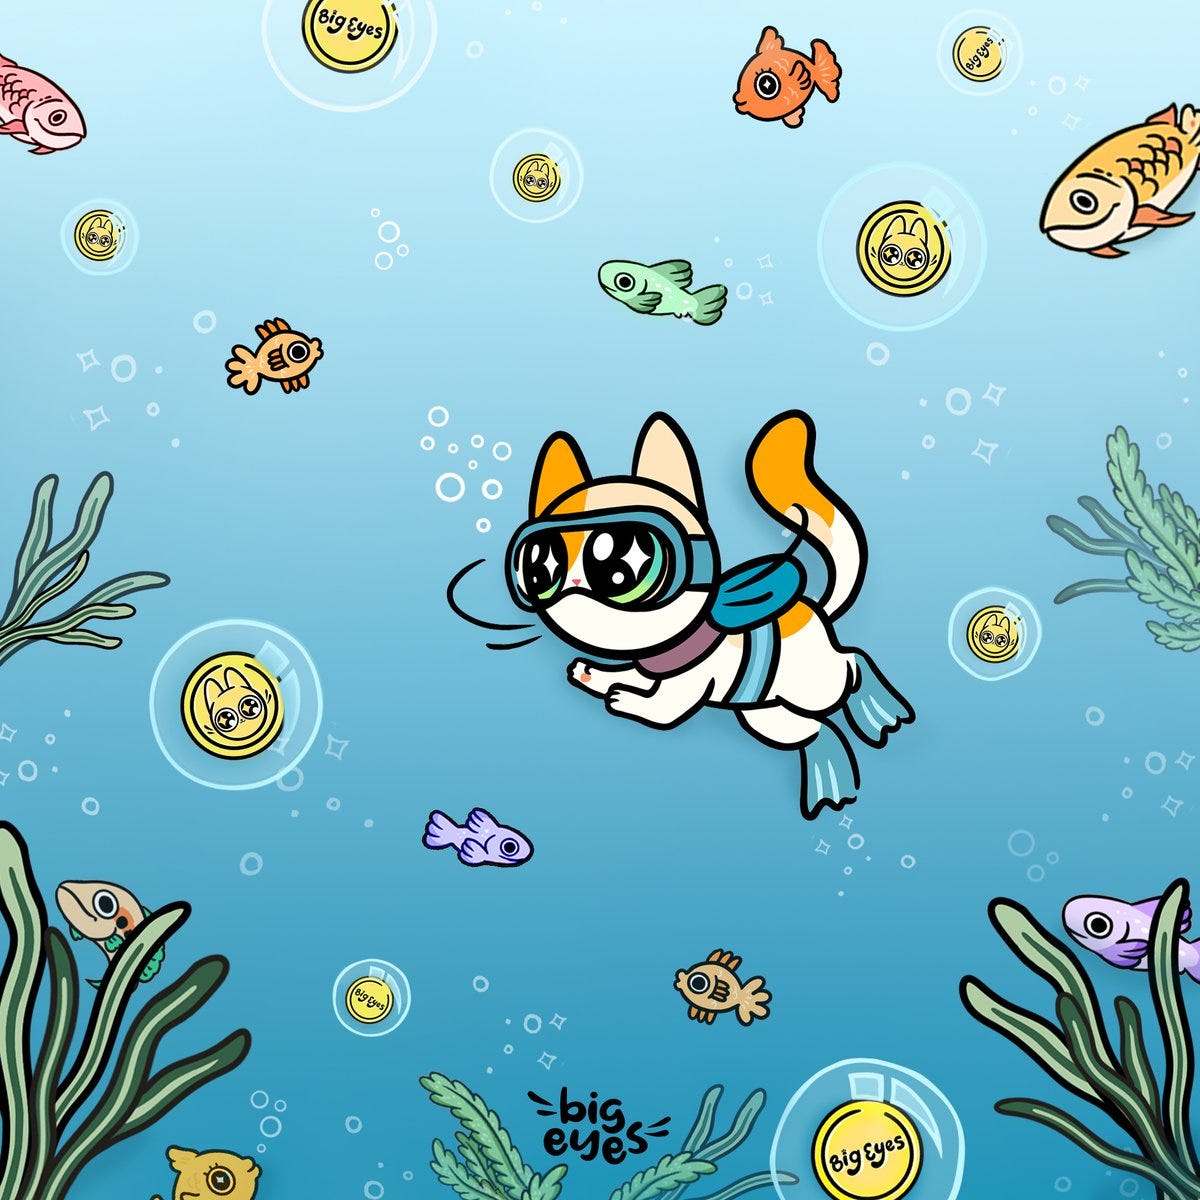 ID: Big Eyes wearing a snorkle and flippers, swims through fish and Big Eyes coins.